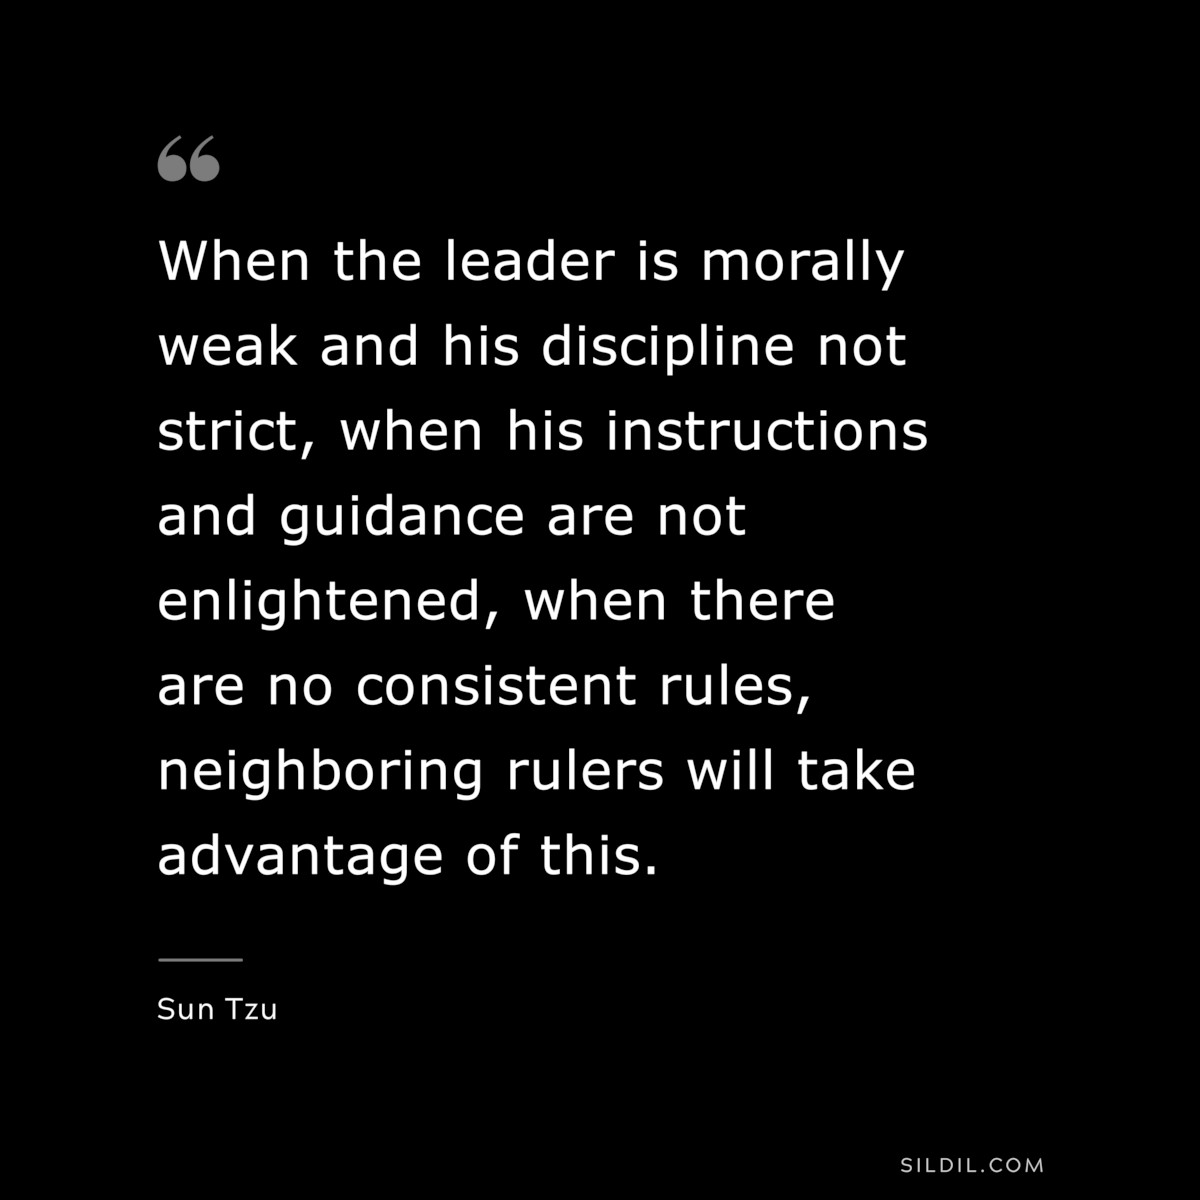 When the leader is morally weak and his discipline not strict, when his instructions and guidance are not enlightened, when there are no consistent rules, neighboring rulers will take advantage of this.― Sun Tzu